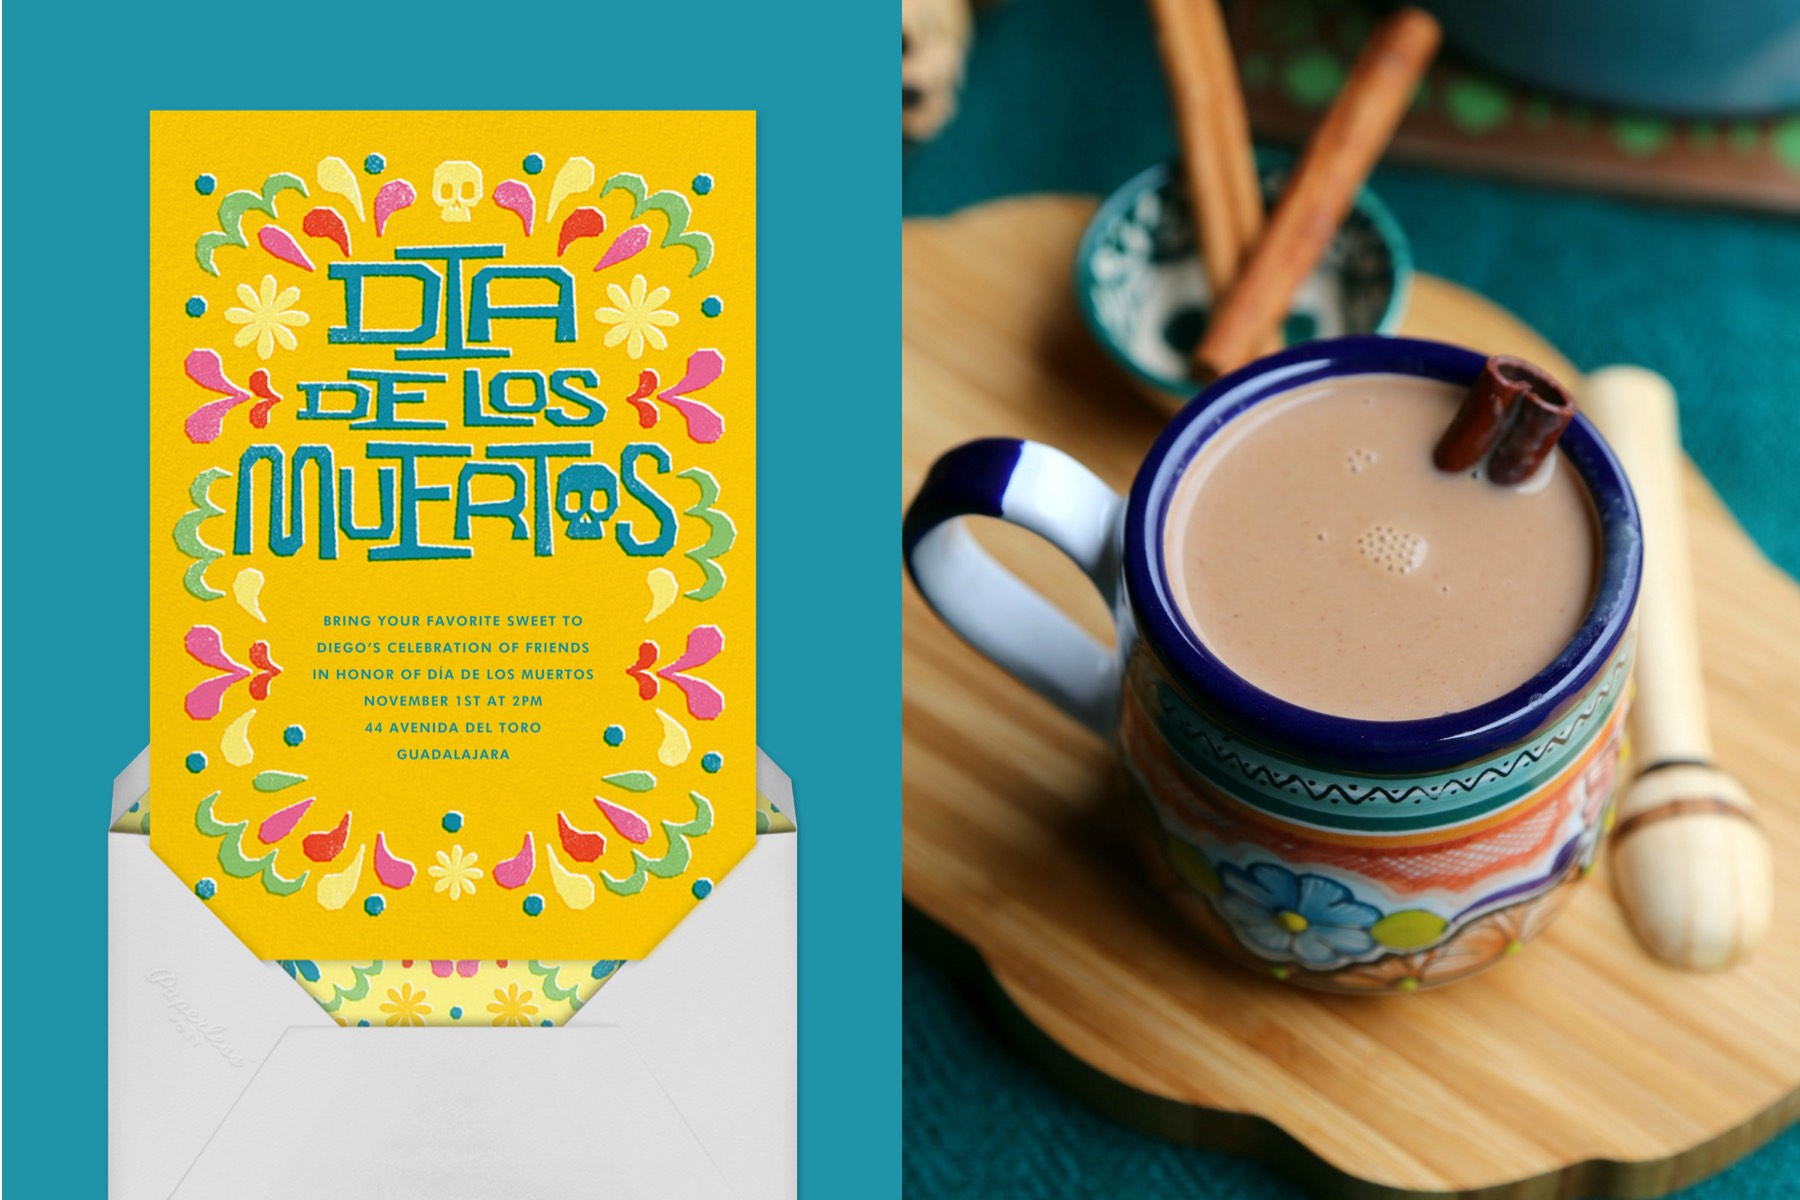 Left: An online invitation featuring floral accents in bright colors. Right: A close-up shot of Champurrado in a mug.